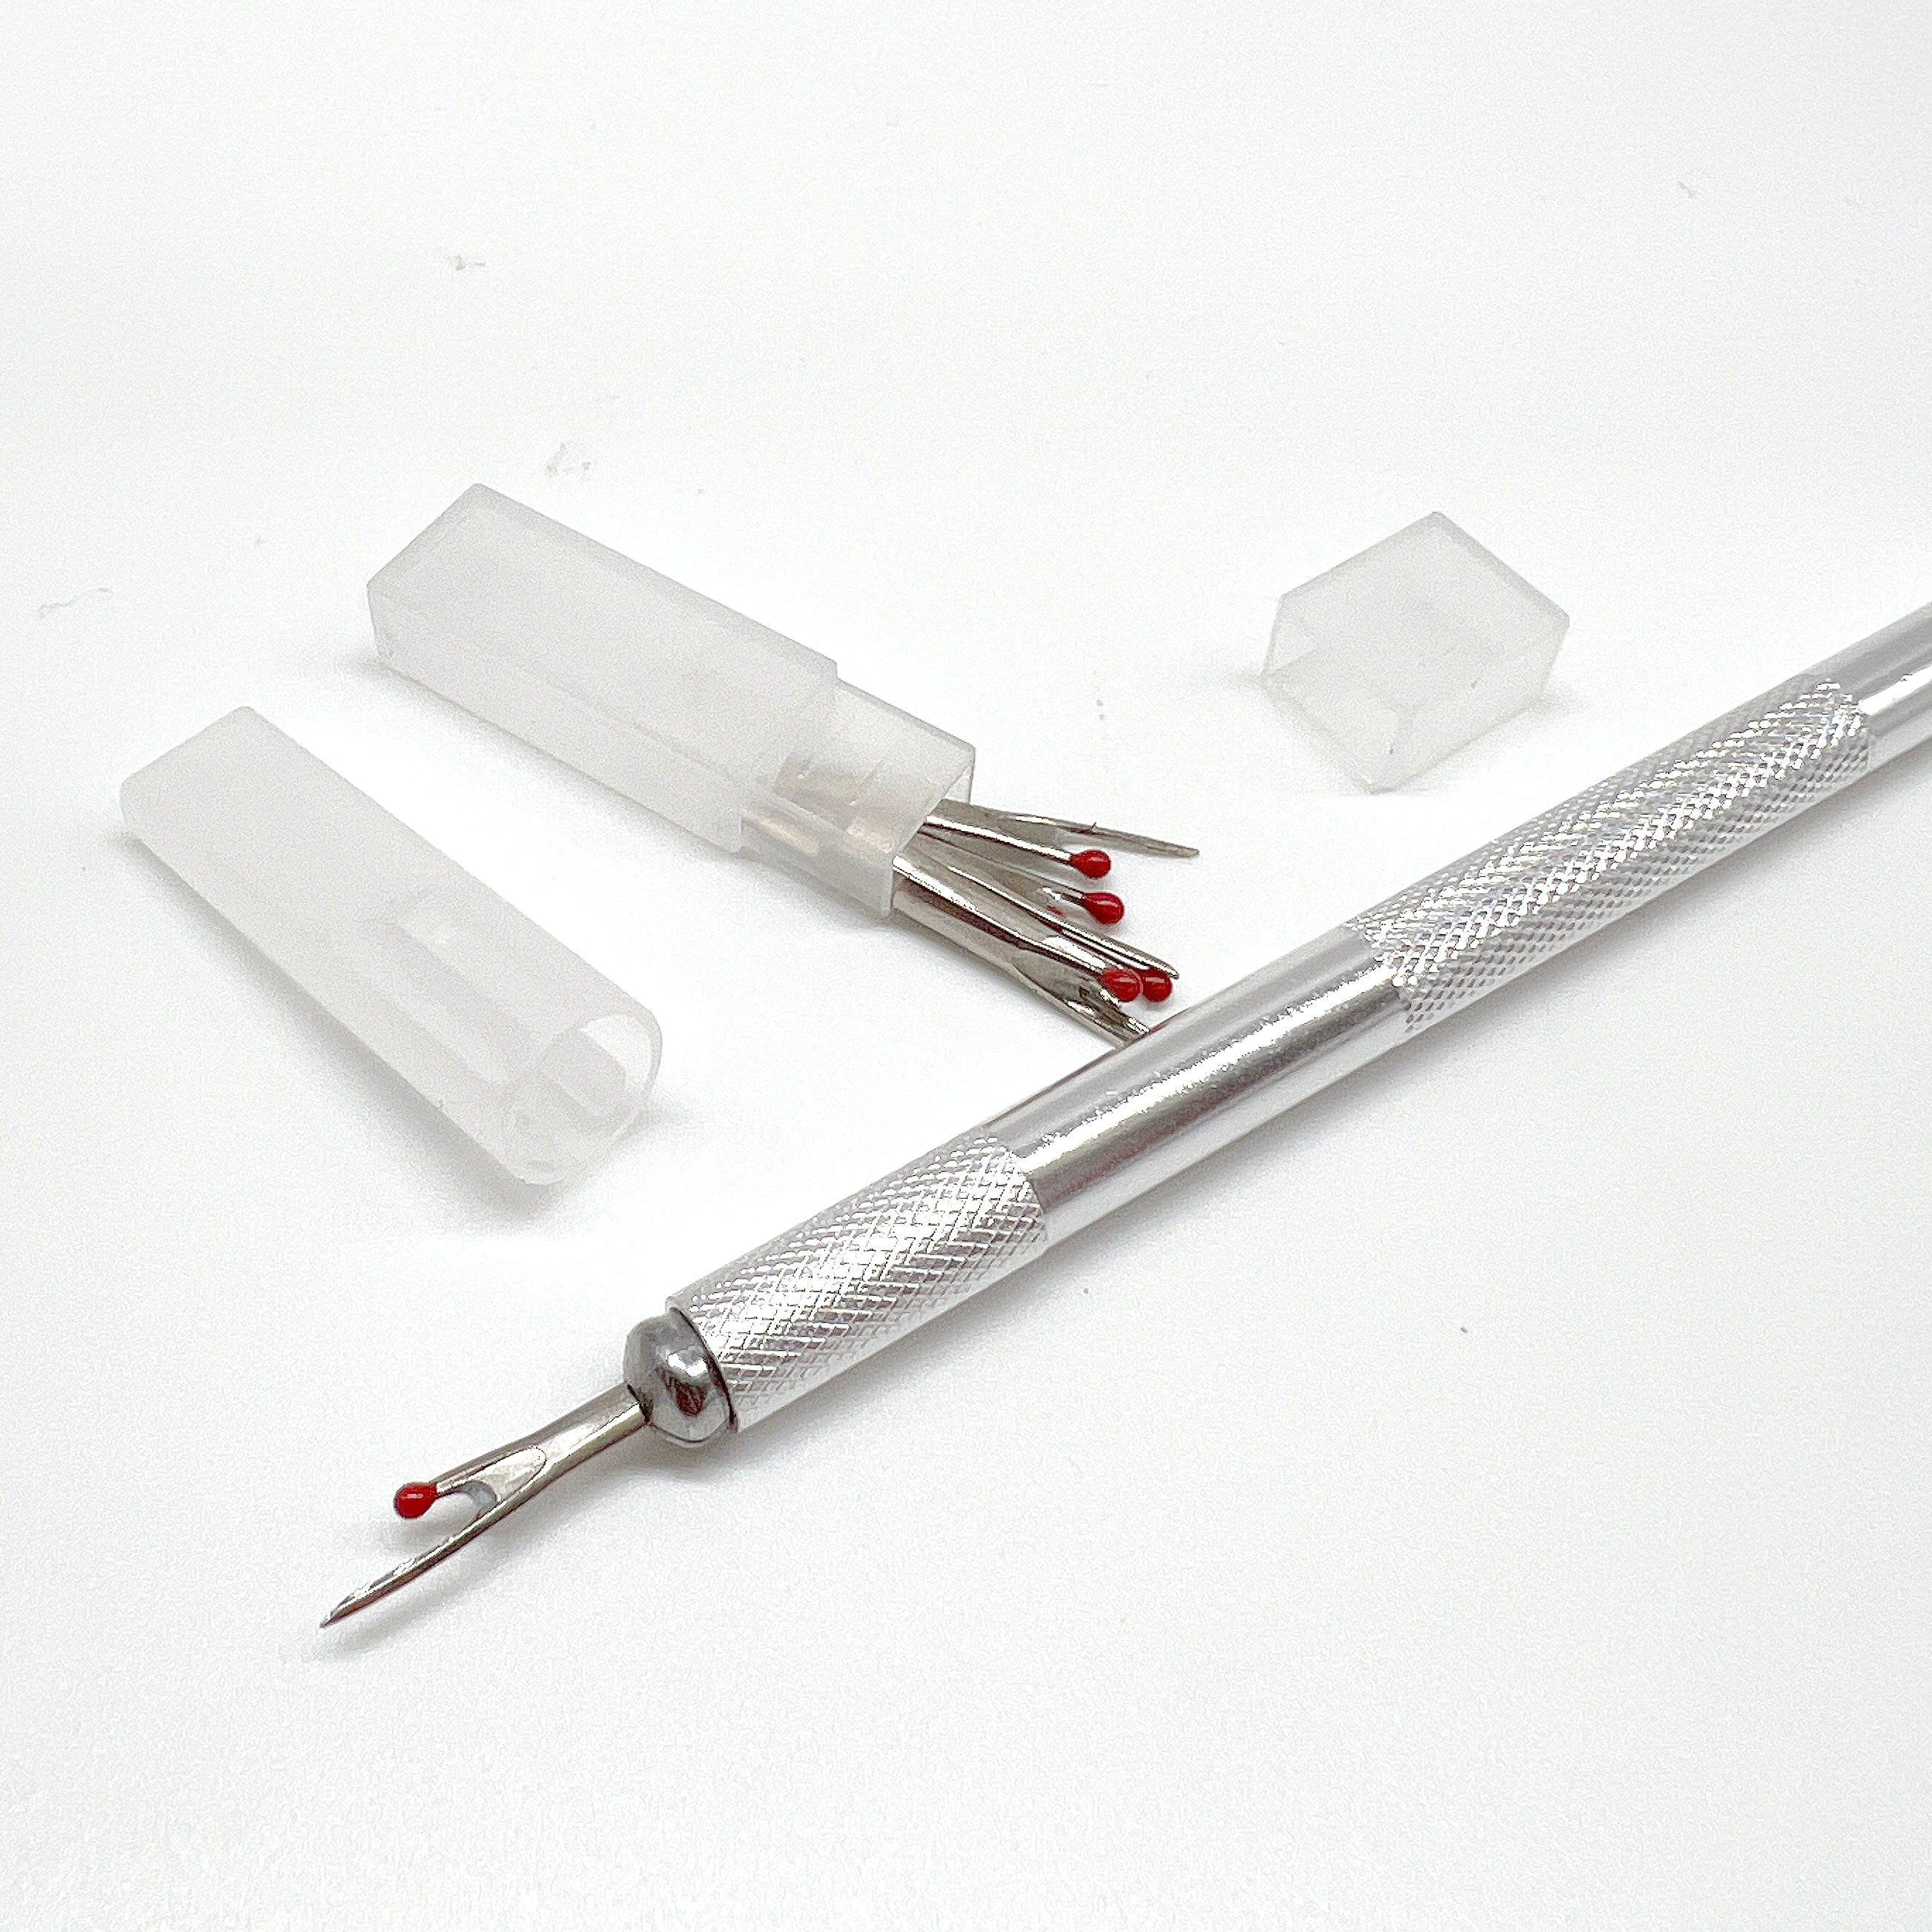 Precision Metal Seam Ripper Thread Cutters with Extra Tips in 2 Colors